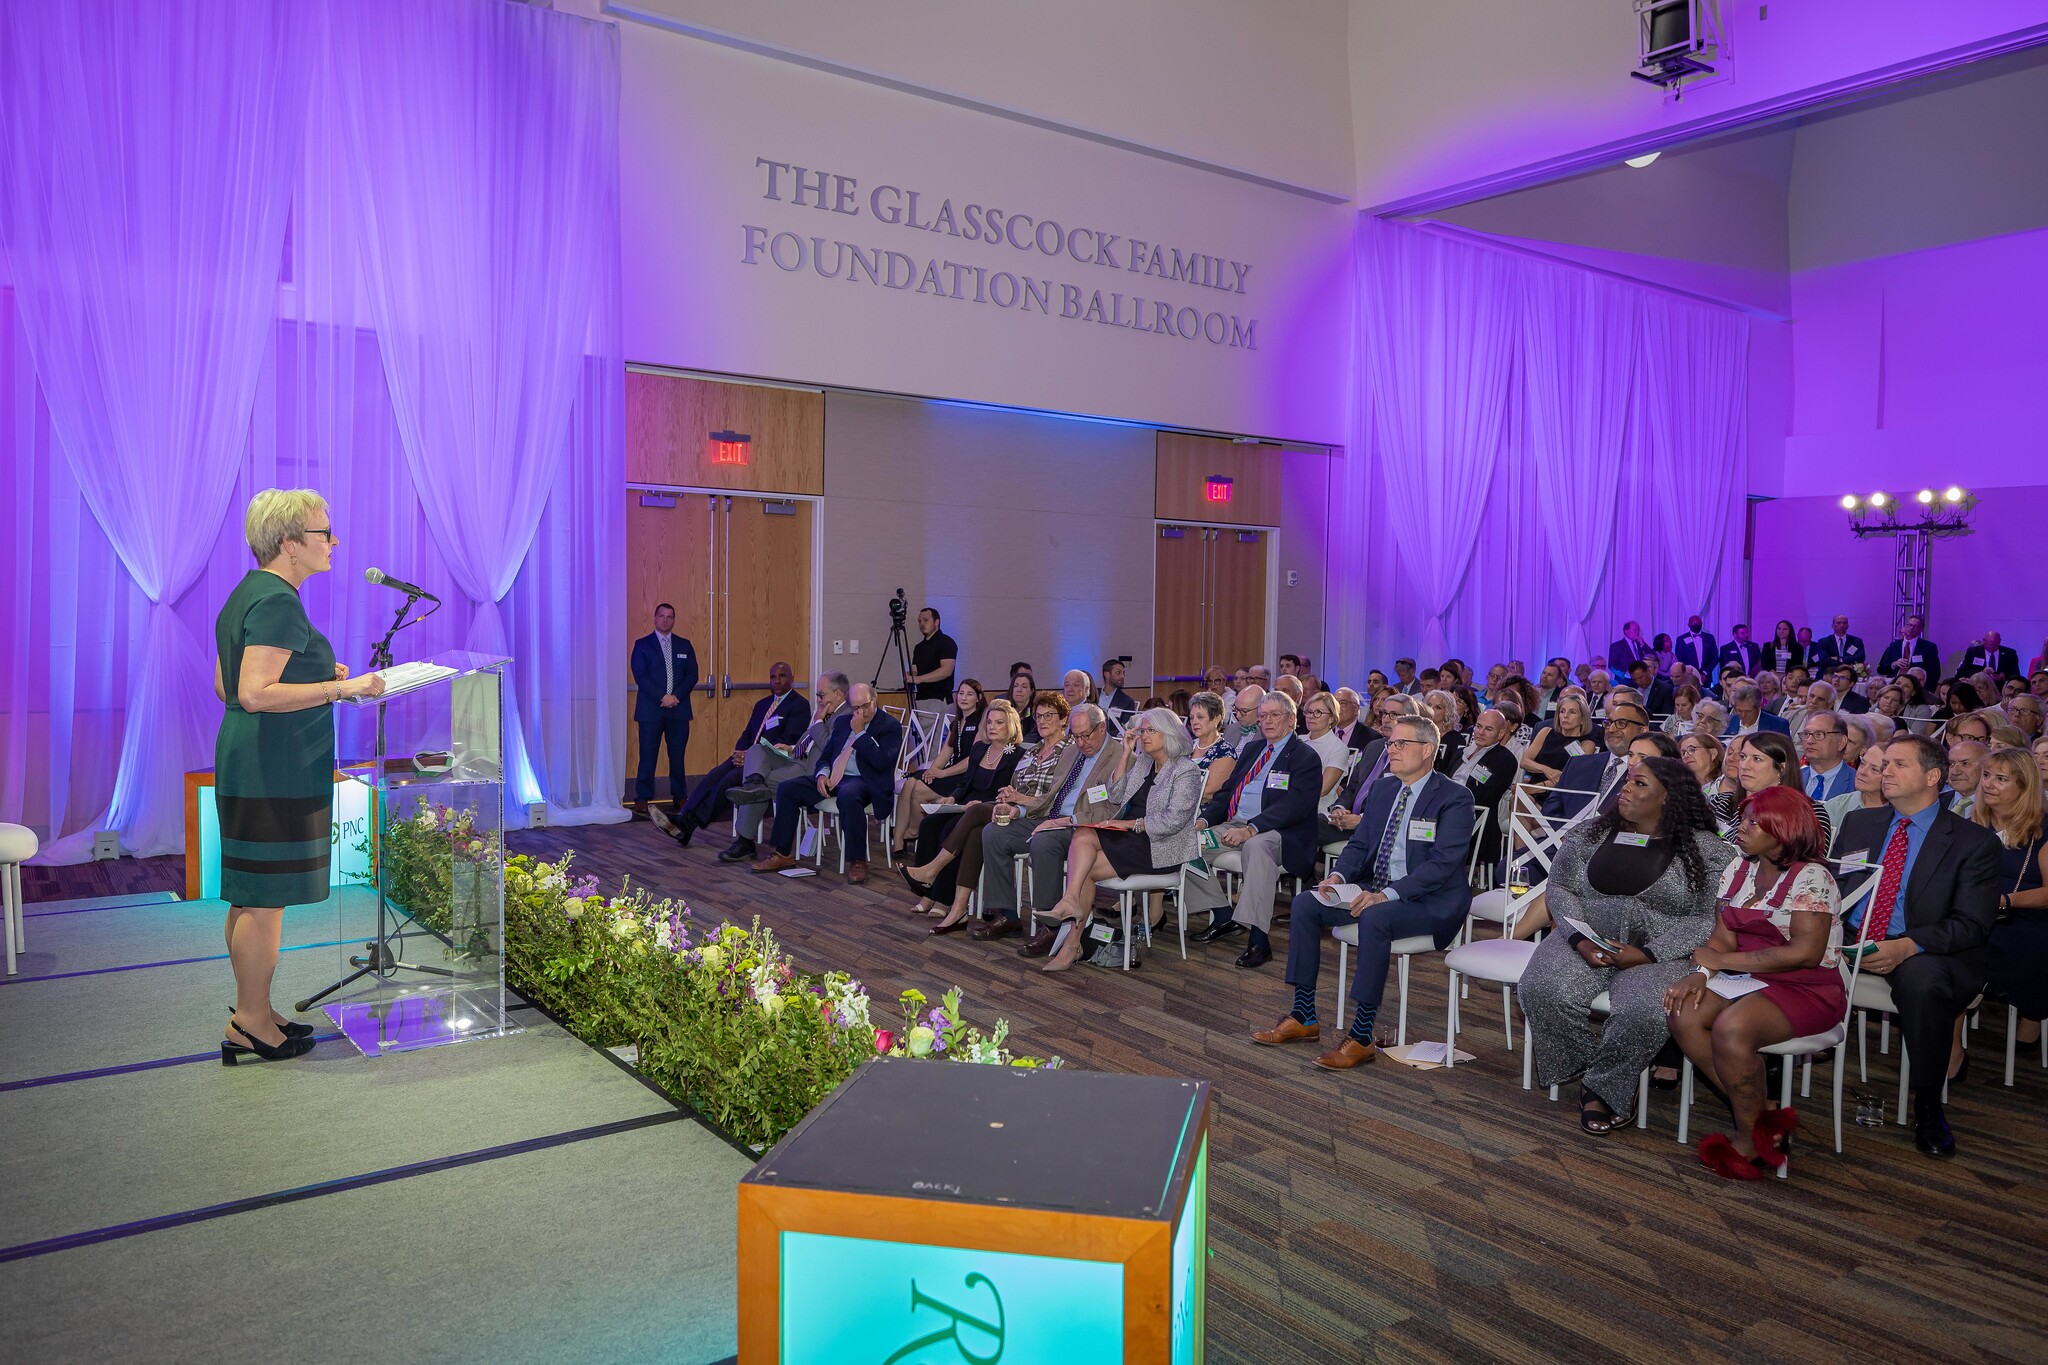 On May 11, after three years, Radiance, Cleveland State University’s premier fundraising event, returned to the campus ballroom to celebrate over $3 million raised in support for student scholarships, programs, services and more. During the event, attende